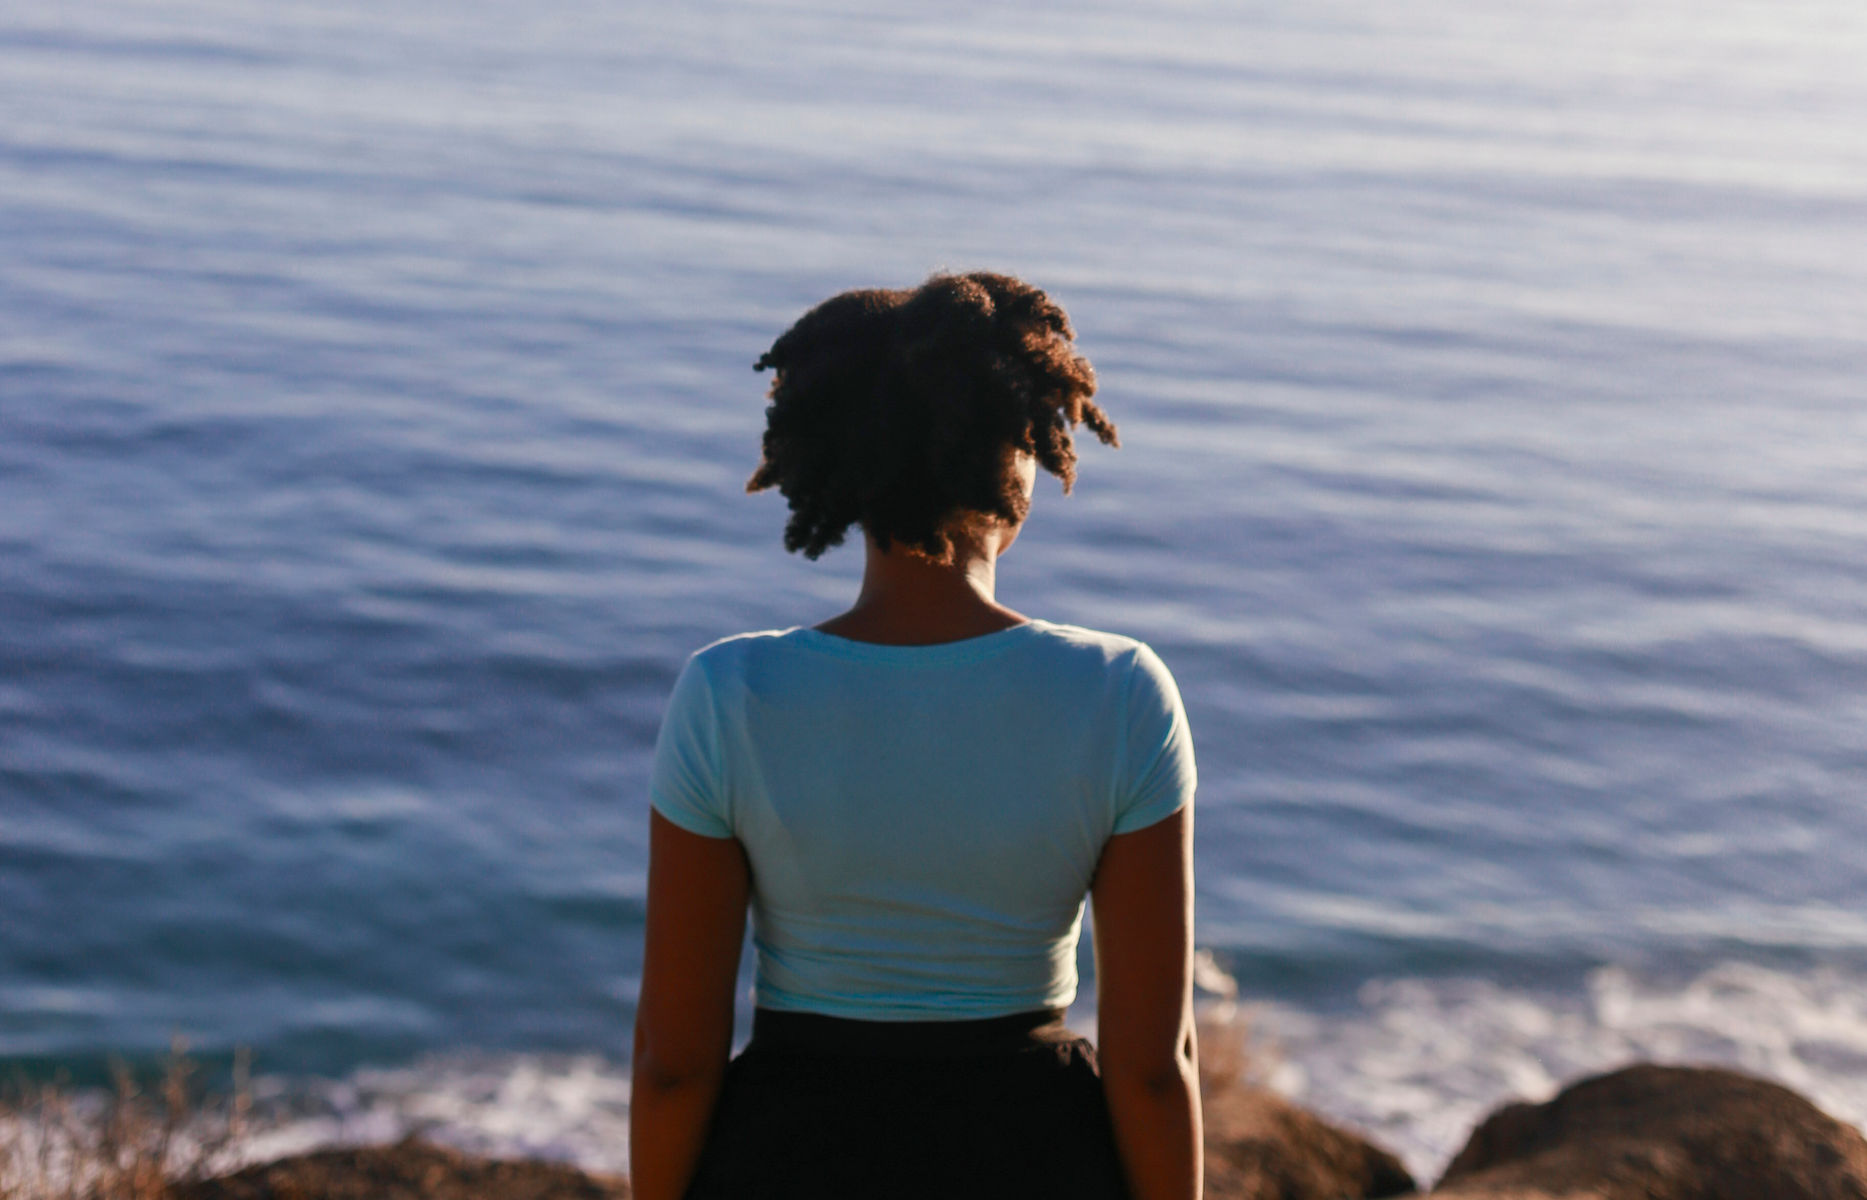 4 Reasons To Be Still and Calm Your Anxious Heart